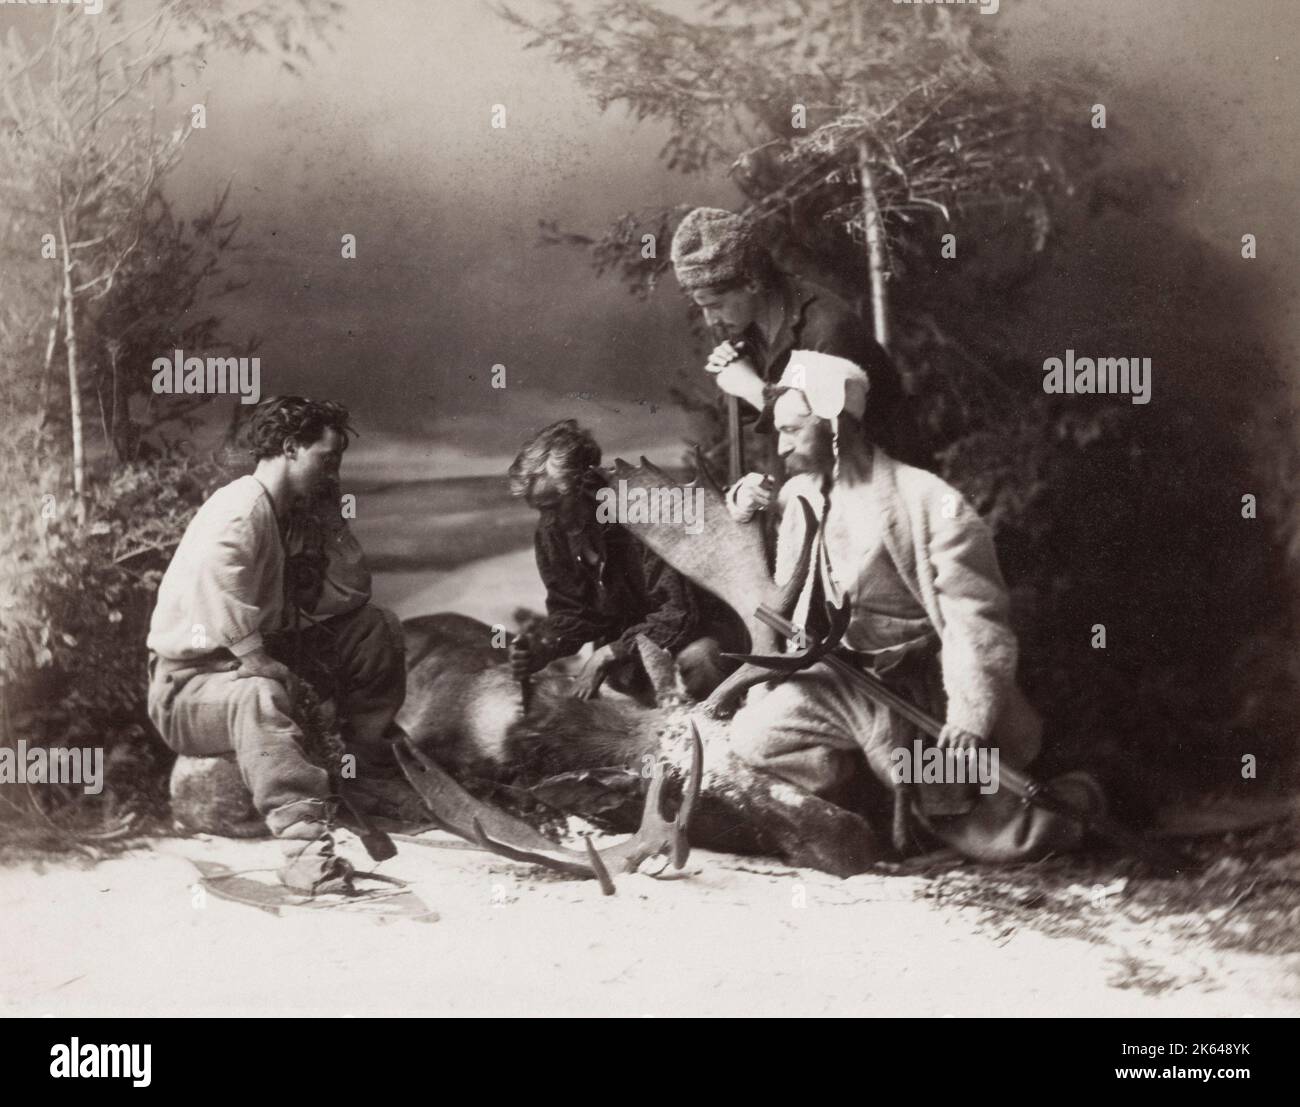 19th century vintage photograph - hunters skinning a deer in snow, studio composition by William Notman, Canada, c.1880s. Stock Photo